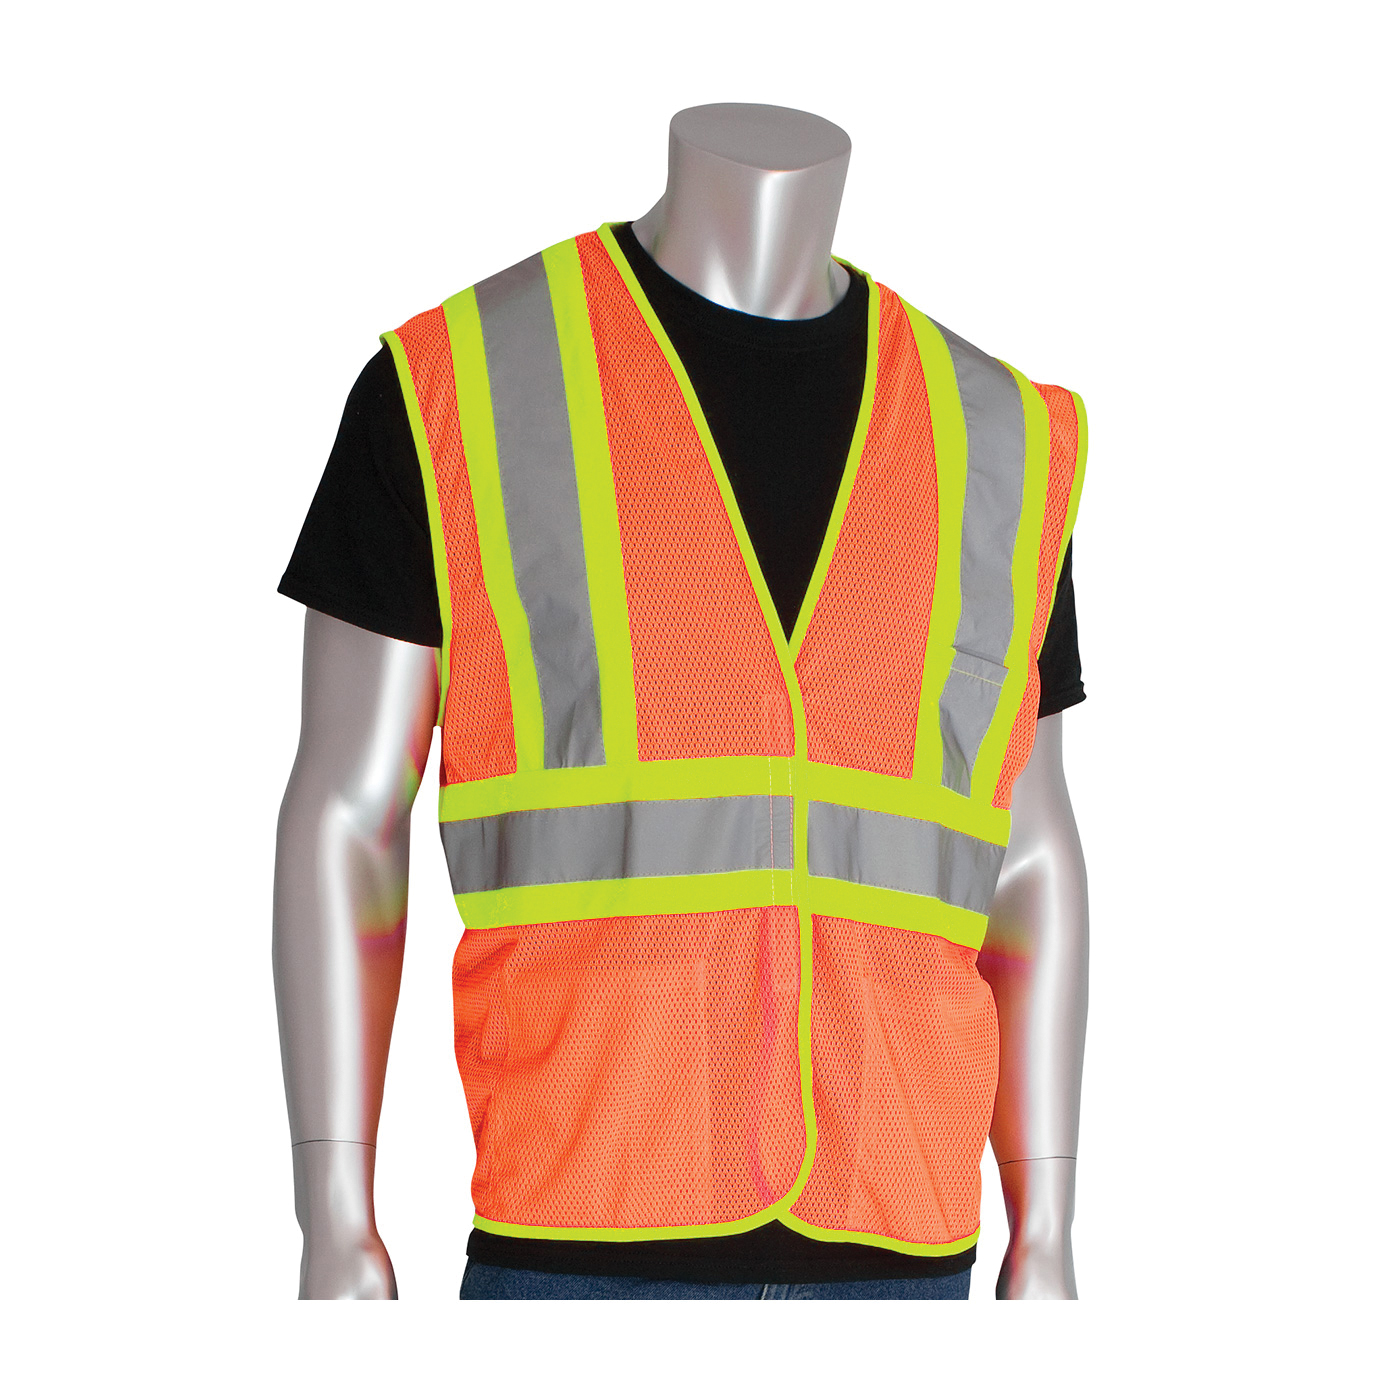 PIP® 302-MVATOR-M 2-Tone Safety Vest, M, Hi-Viz Orange, Polyester, Hook and Loop Closure, 3 Pockets, ANSI Class: Class 2, Specifications Met: ANSI Specified